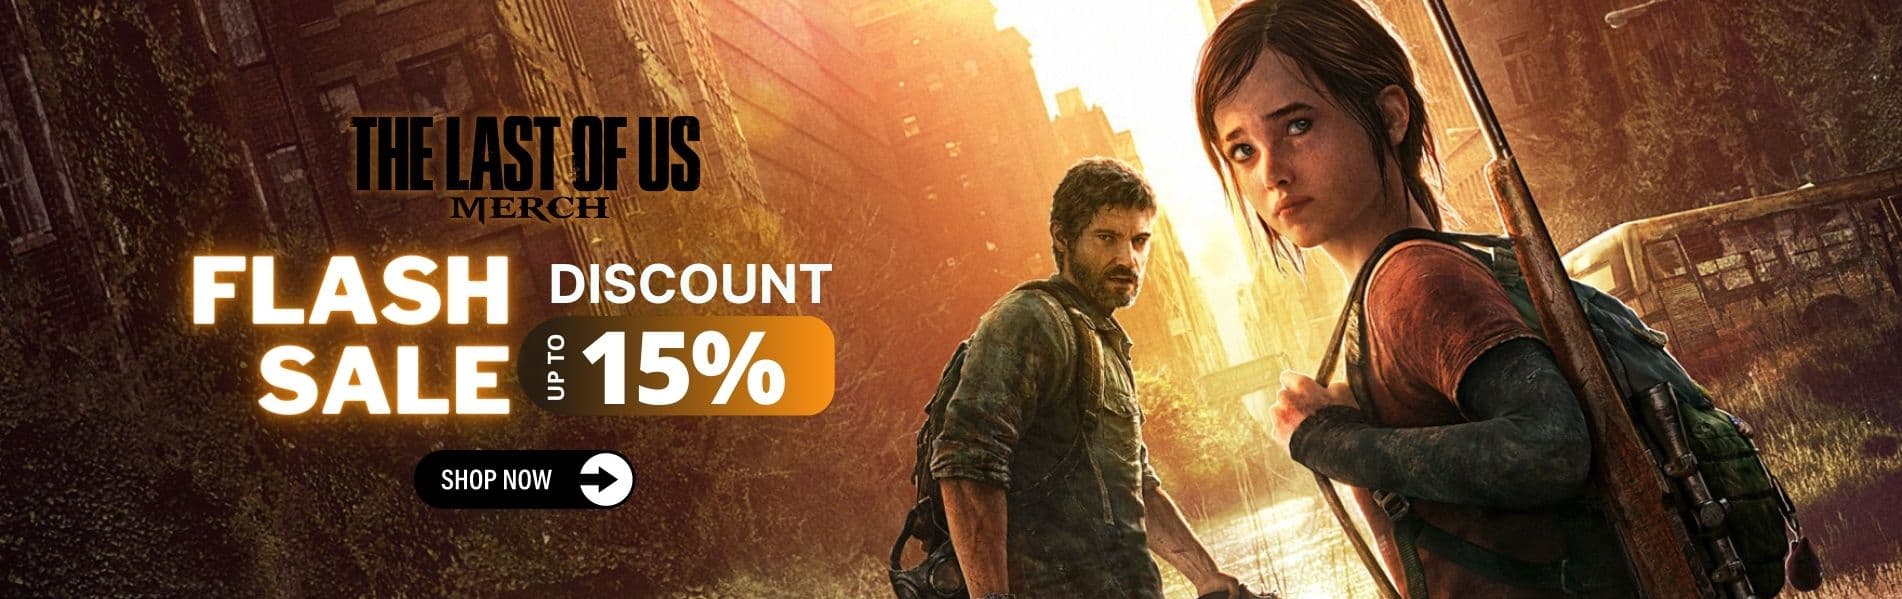 The Last Of Us Shop ⚡️ Official The Last Of Us Merchandise Store